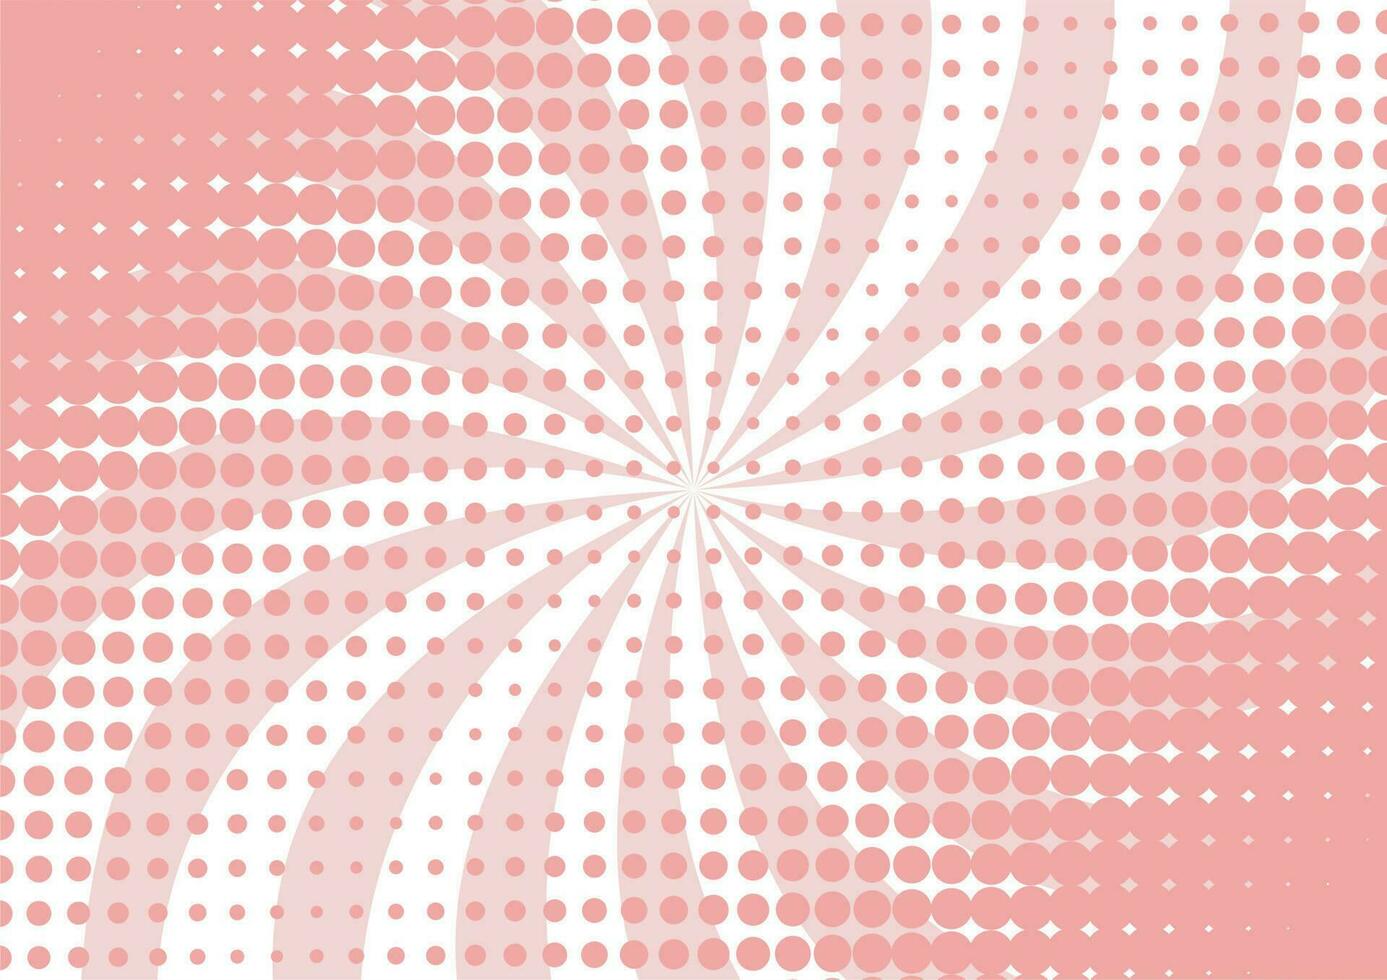 Halftone dots with wavy rays on abstract pink and white background. Comic pop art style with sunburst rays. vector